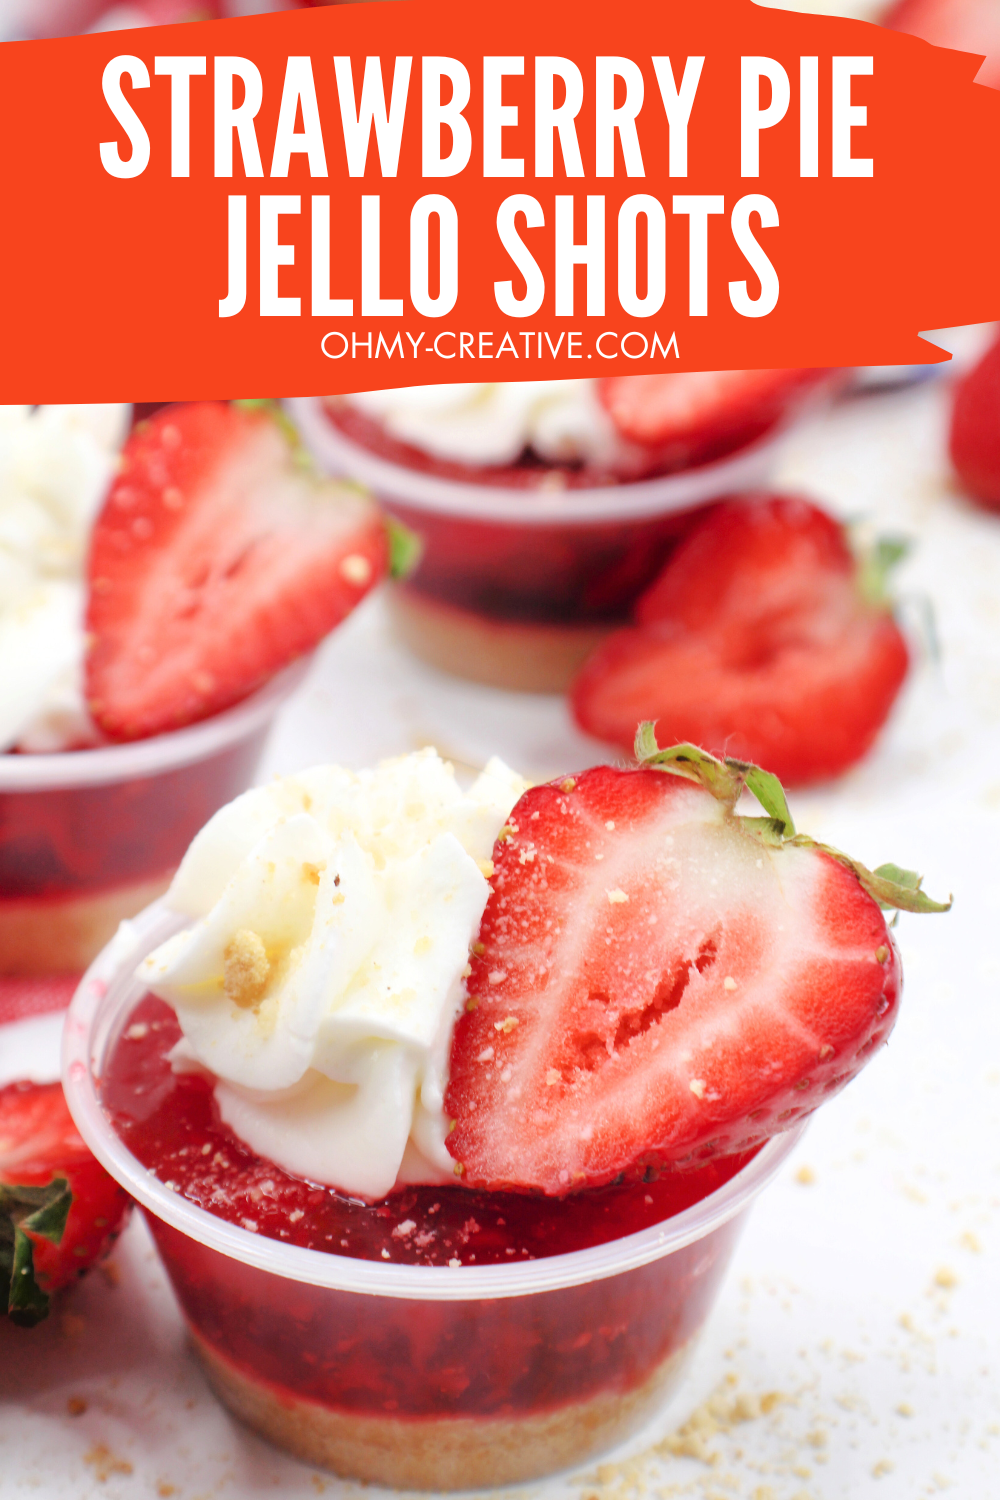 A tasty strawberry jello shot topped with whipped cream and a slice of strawberry.